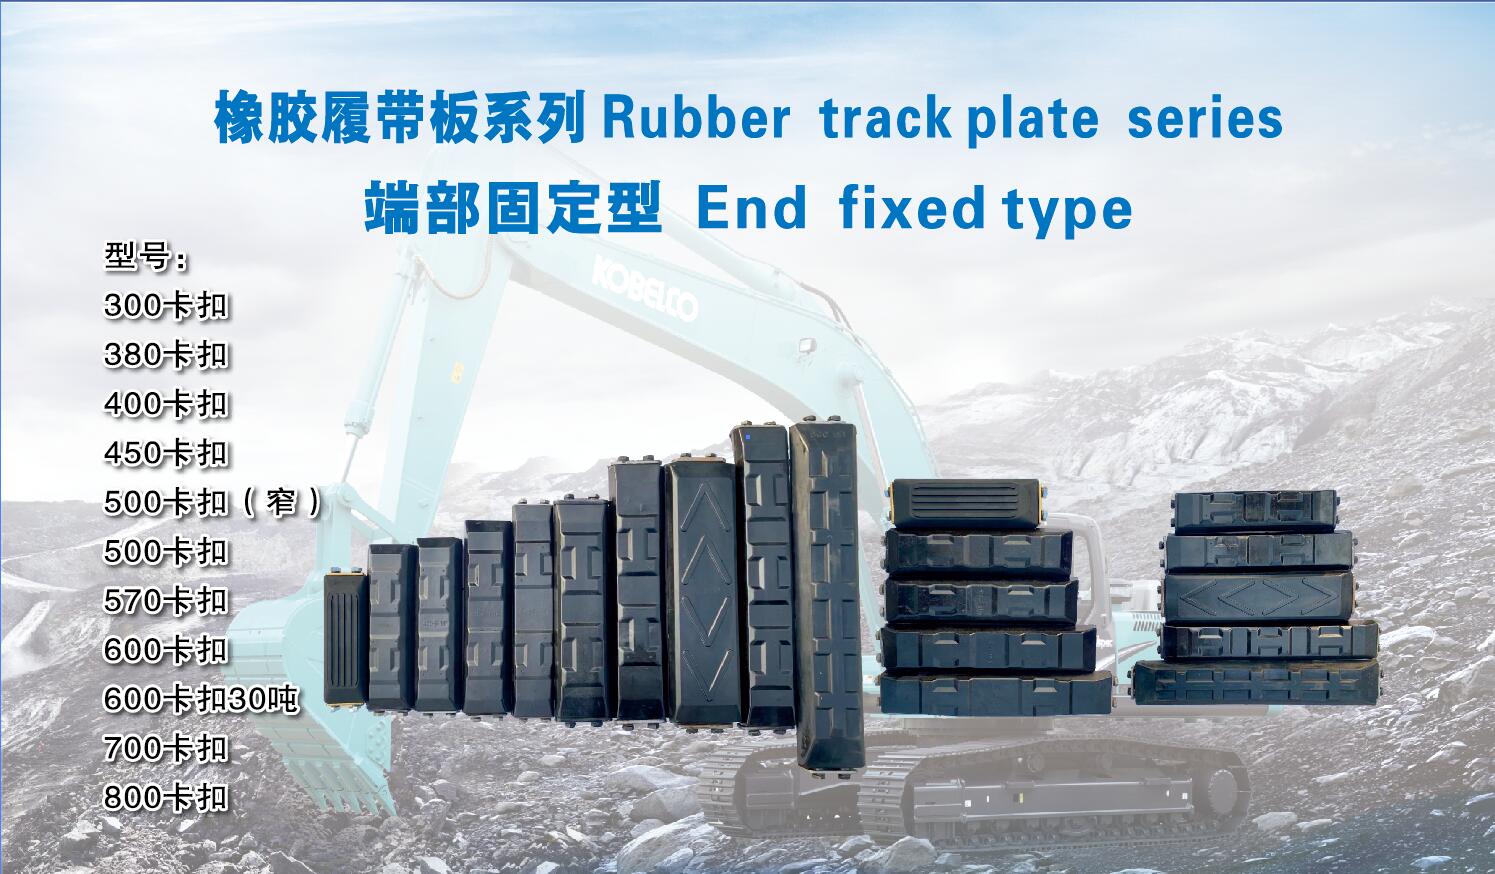 Clip-On Rubber track pads